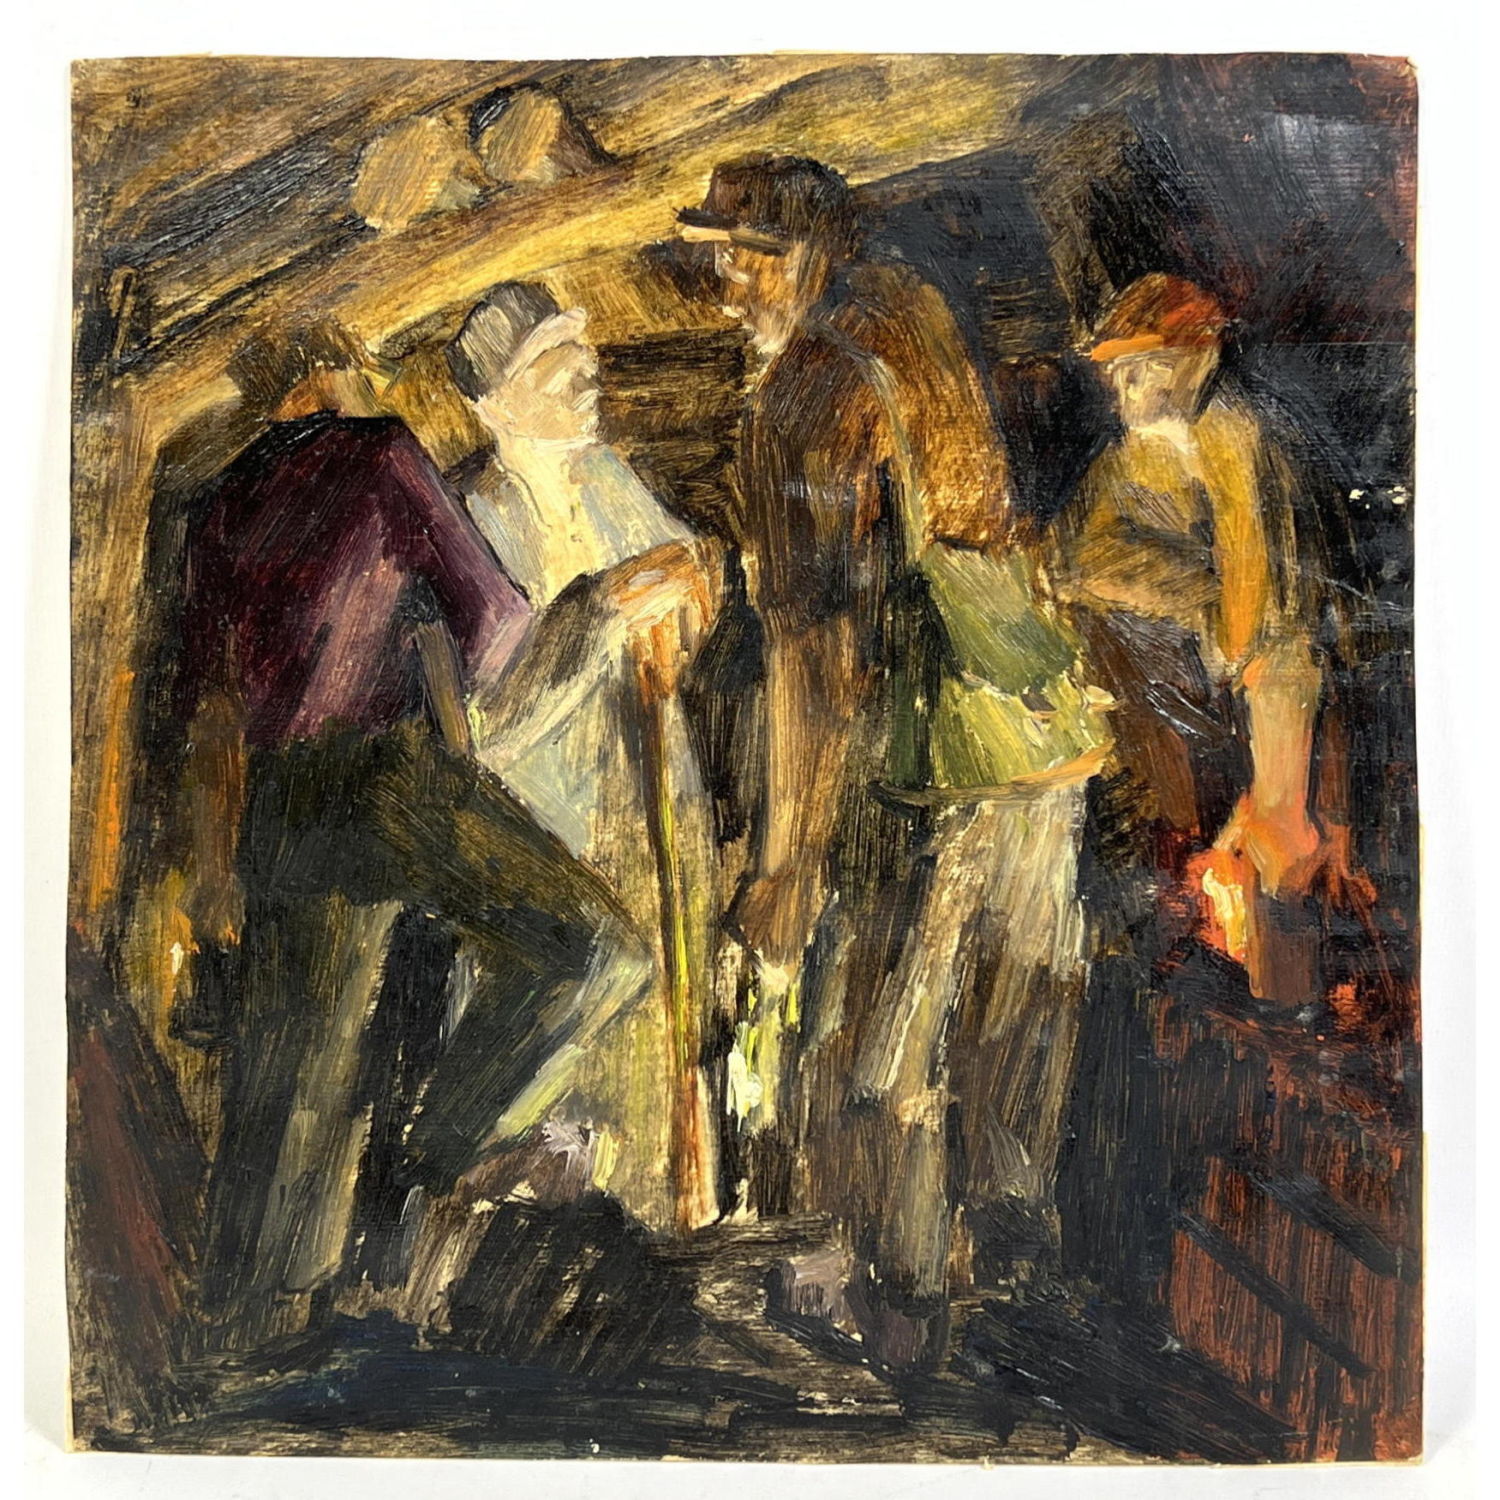 Painting on Paper of Coal Mine 2bac1a